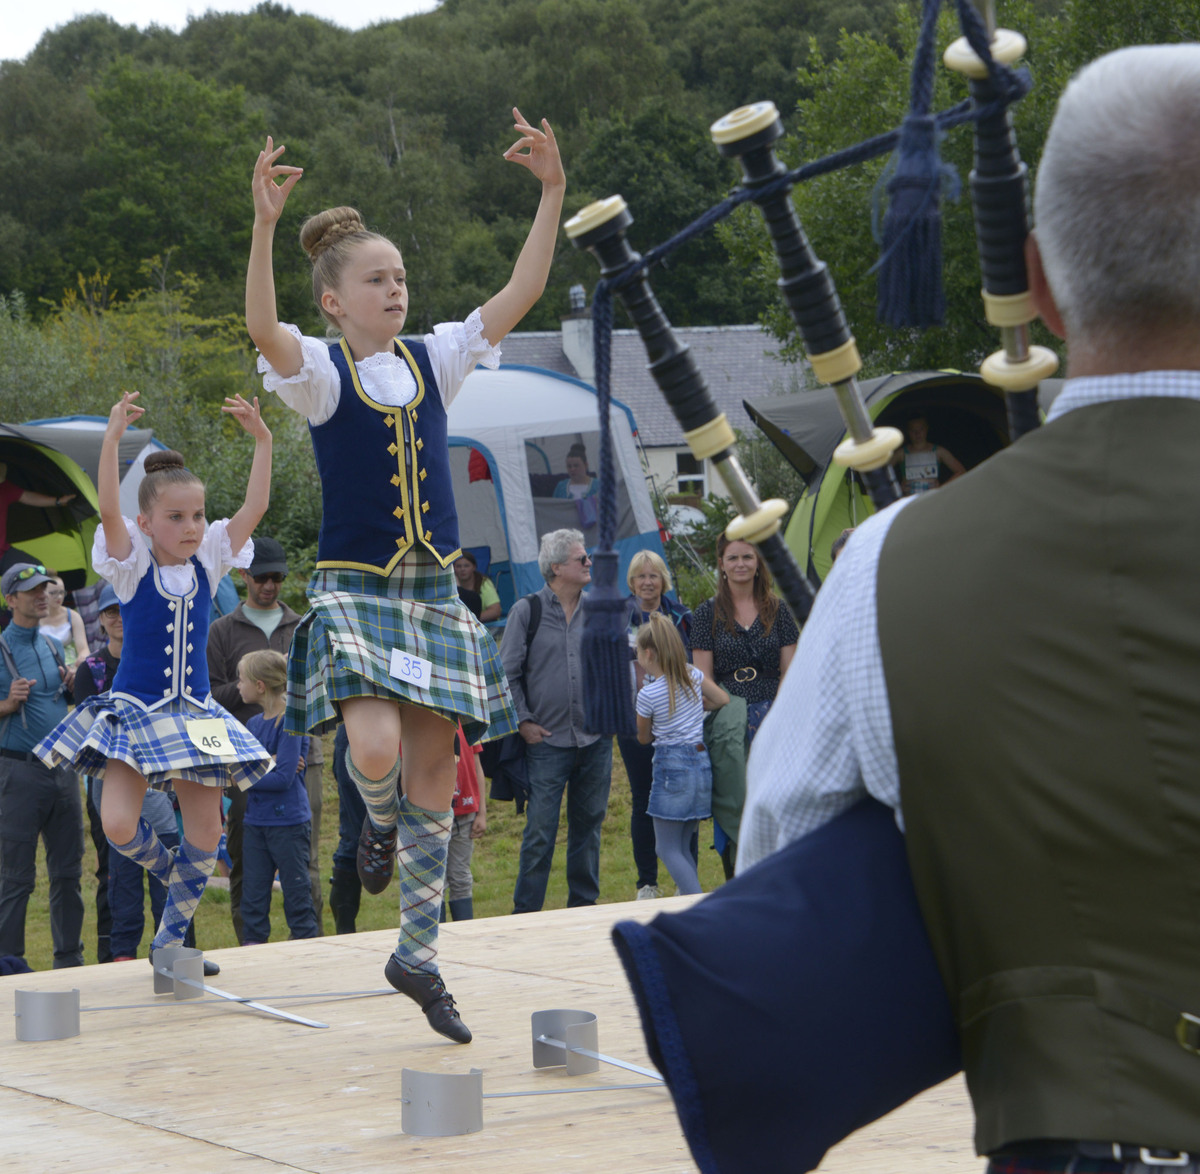 All roads lead to Lovat for Mallaig and Morar Games